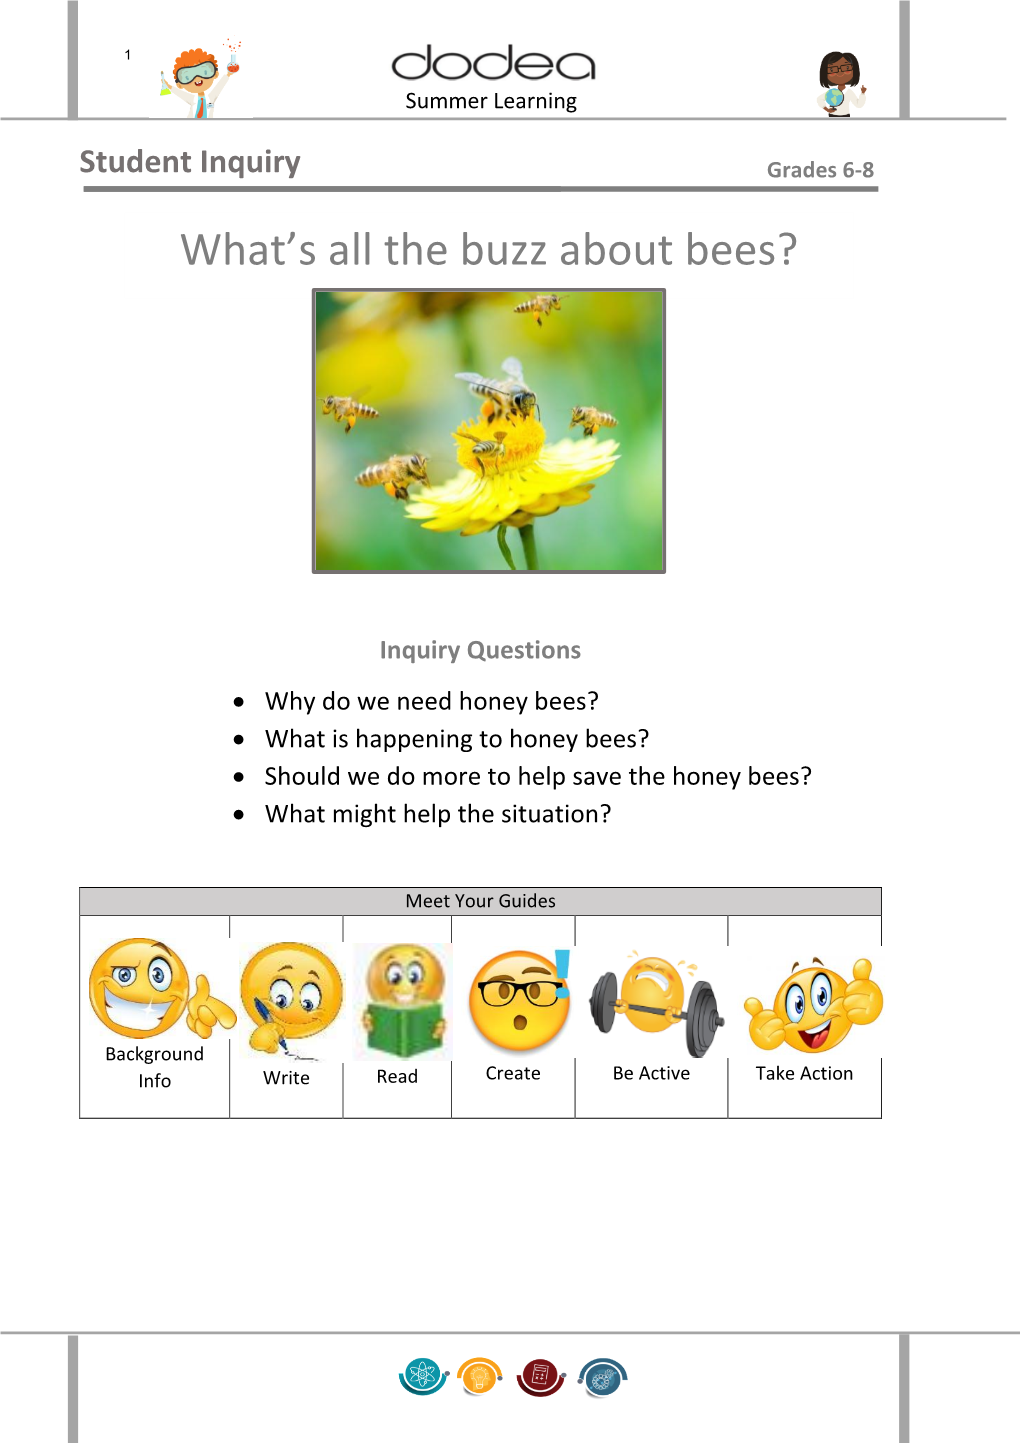 What's All the Buzz About Bees?